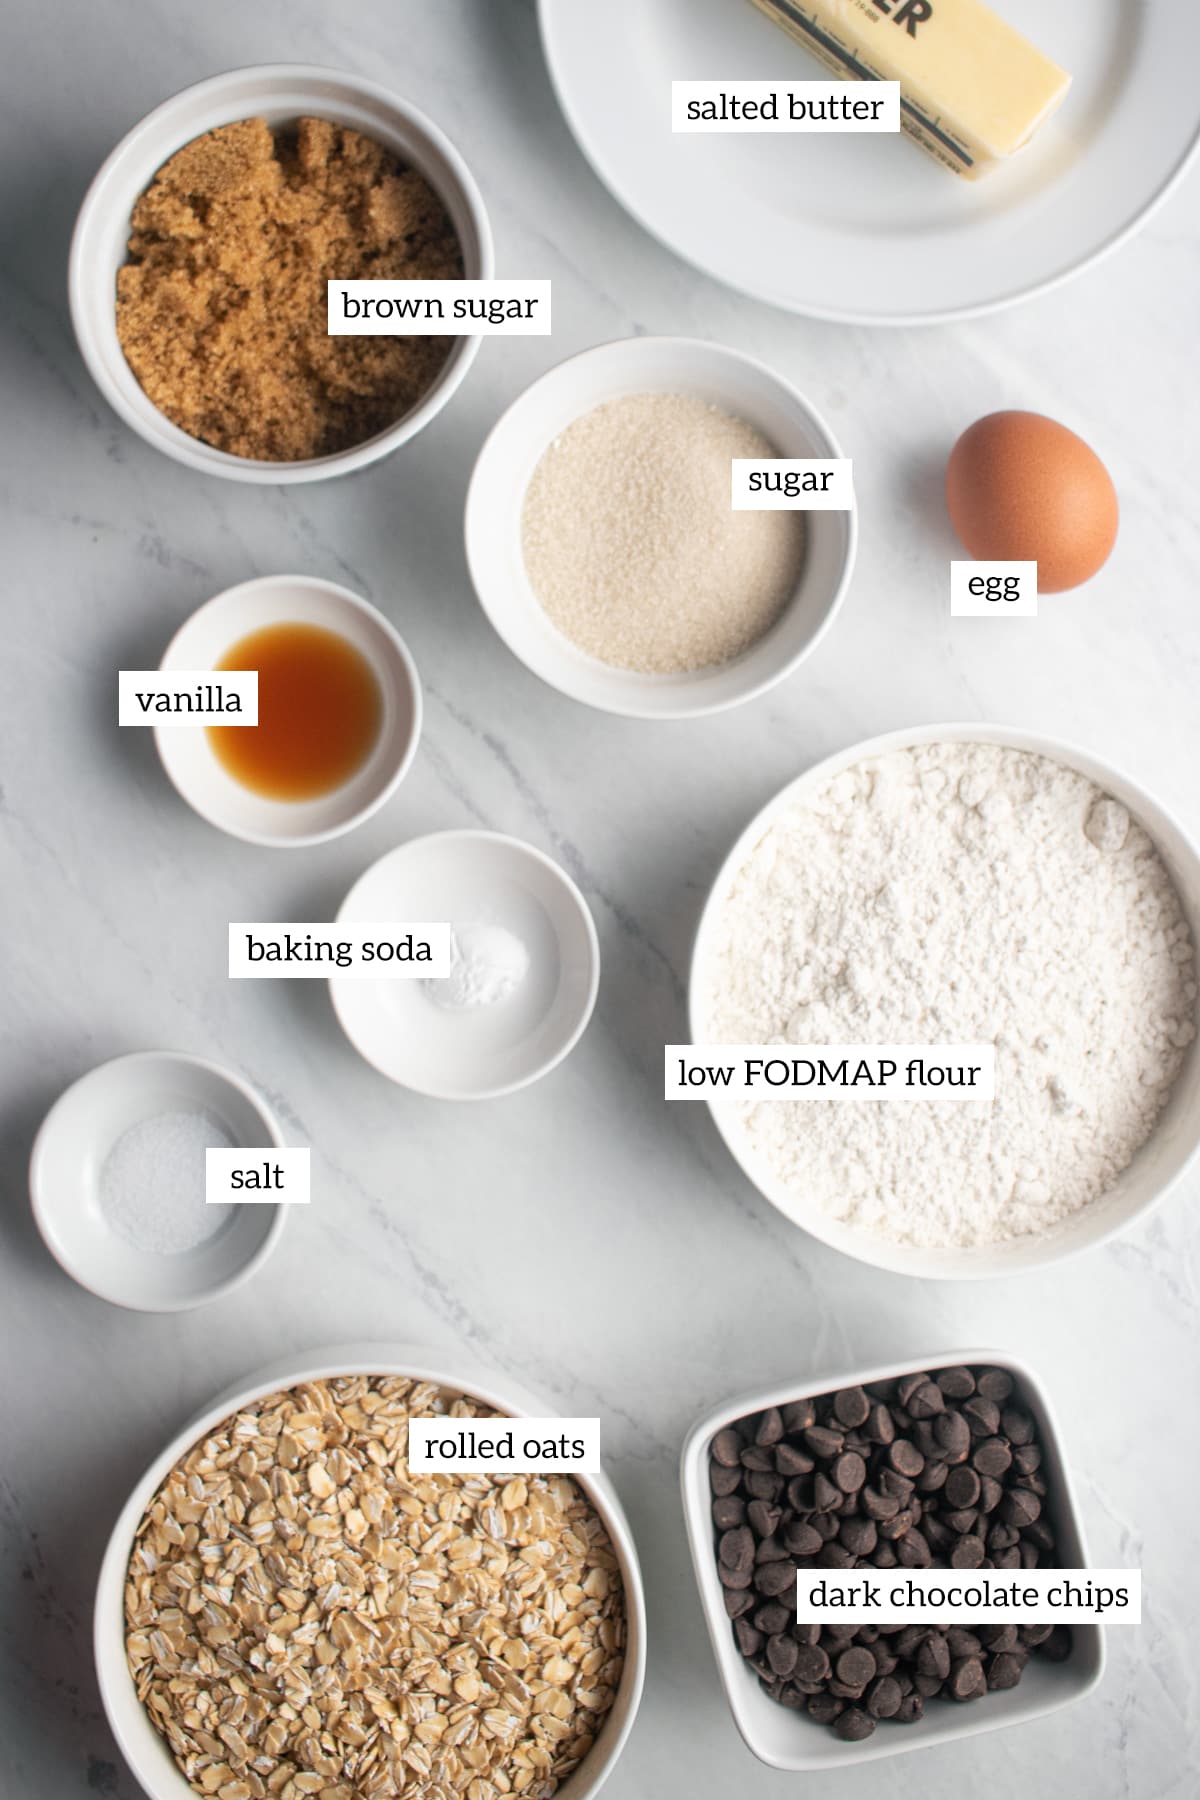 Ingredients needed for low FODMAP oatmeal cookies measured out into individual containers.